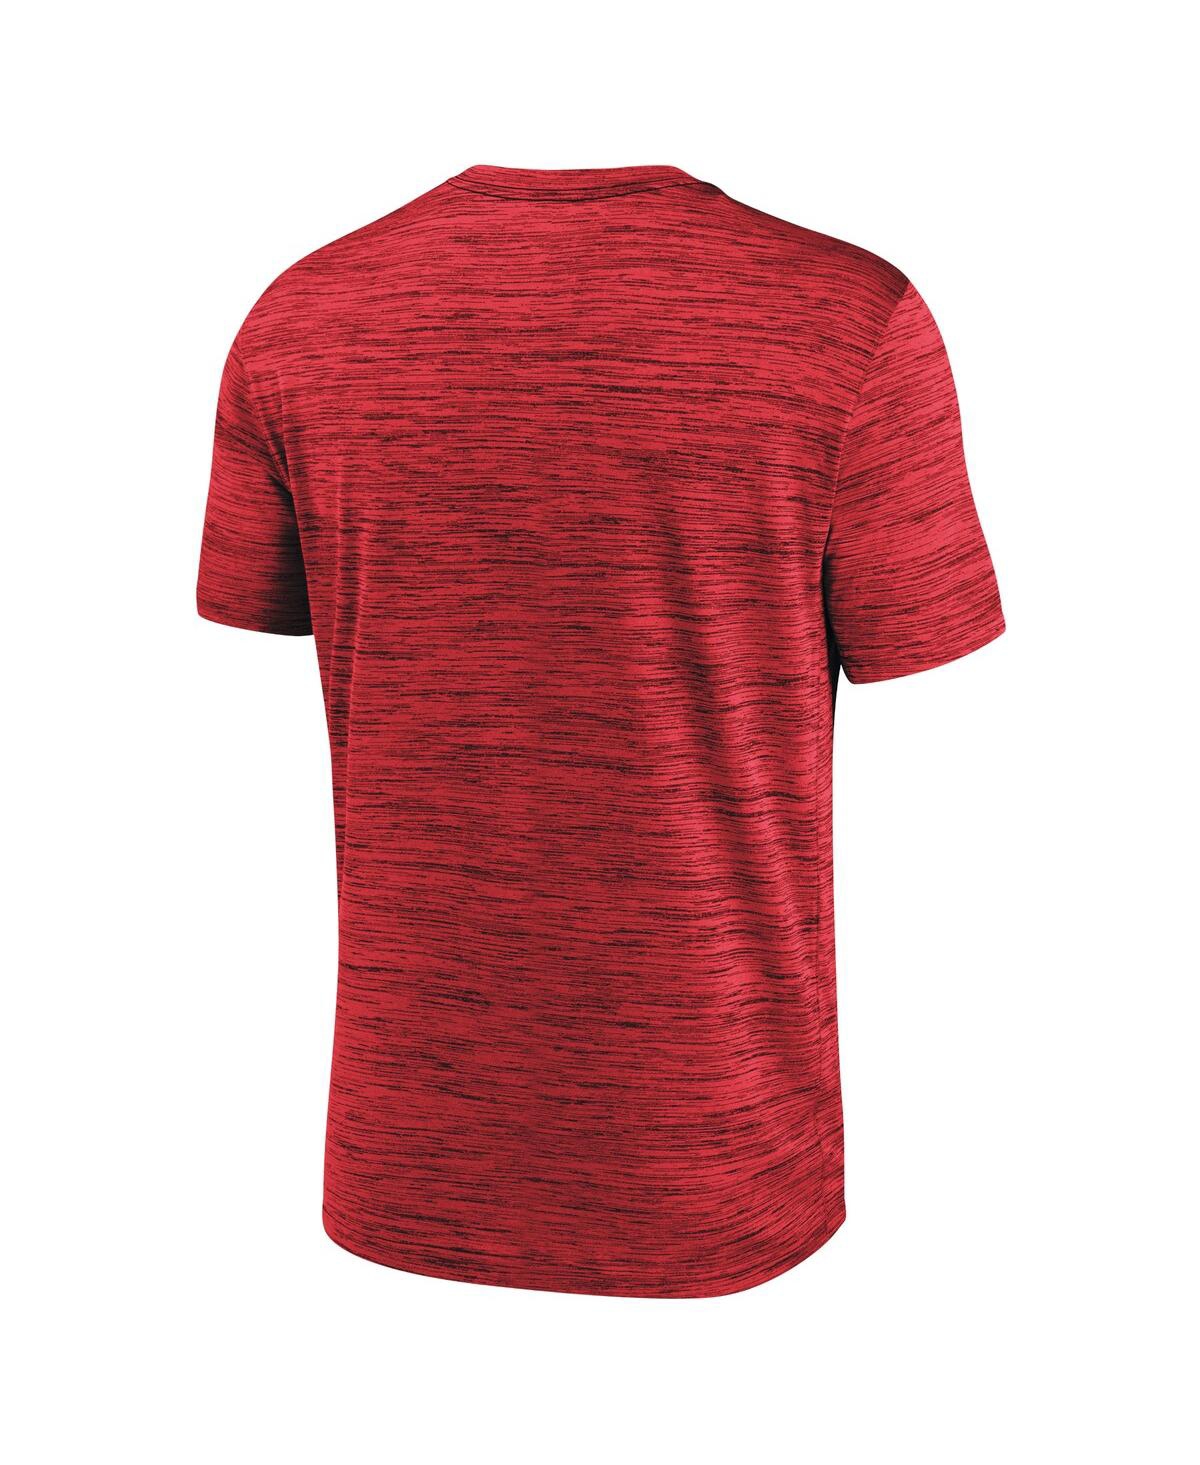 Shop Nike Men's  Red Los Angeles Angels Authentic Collection Velocity Performance Practice T-shirt